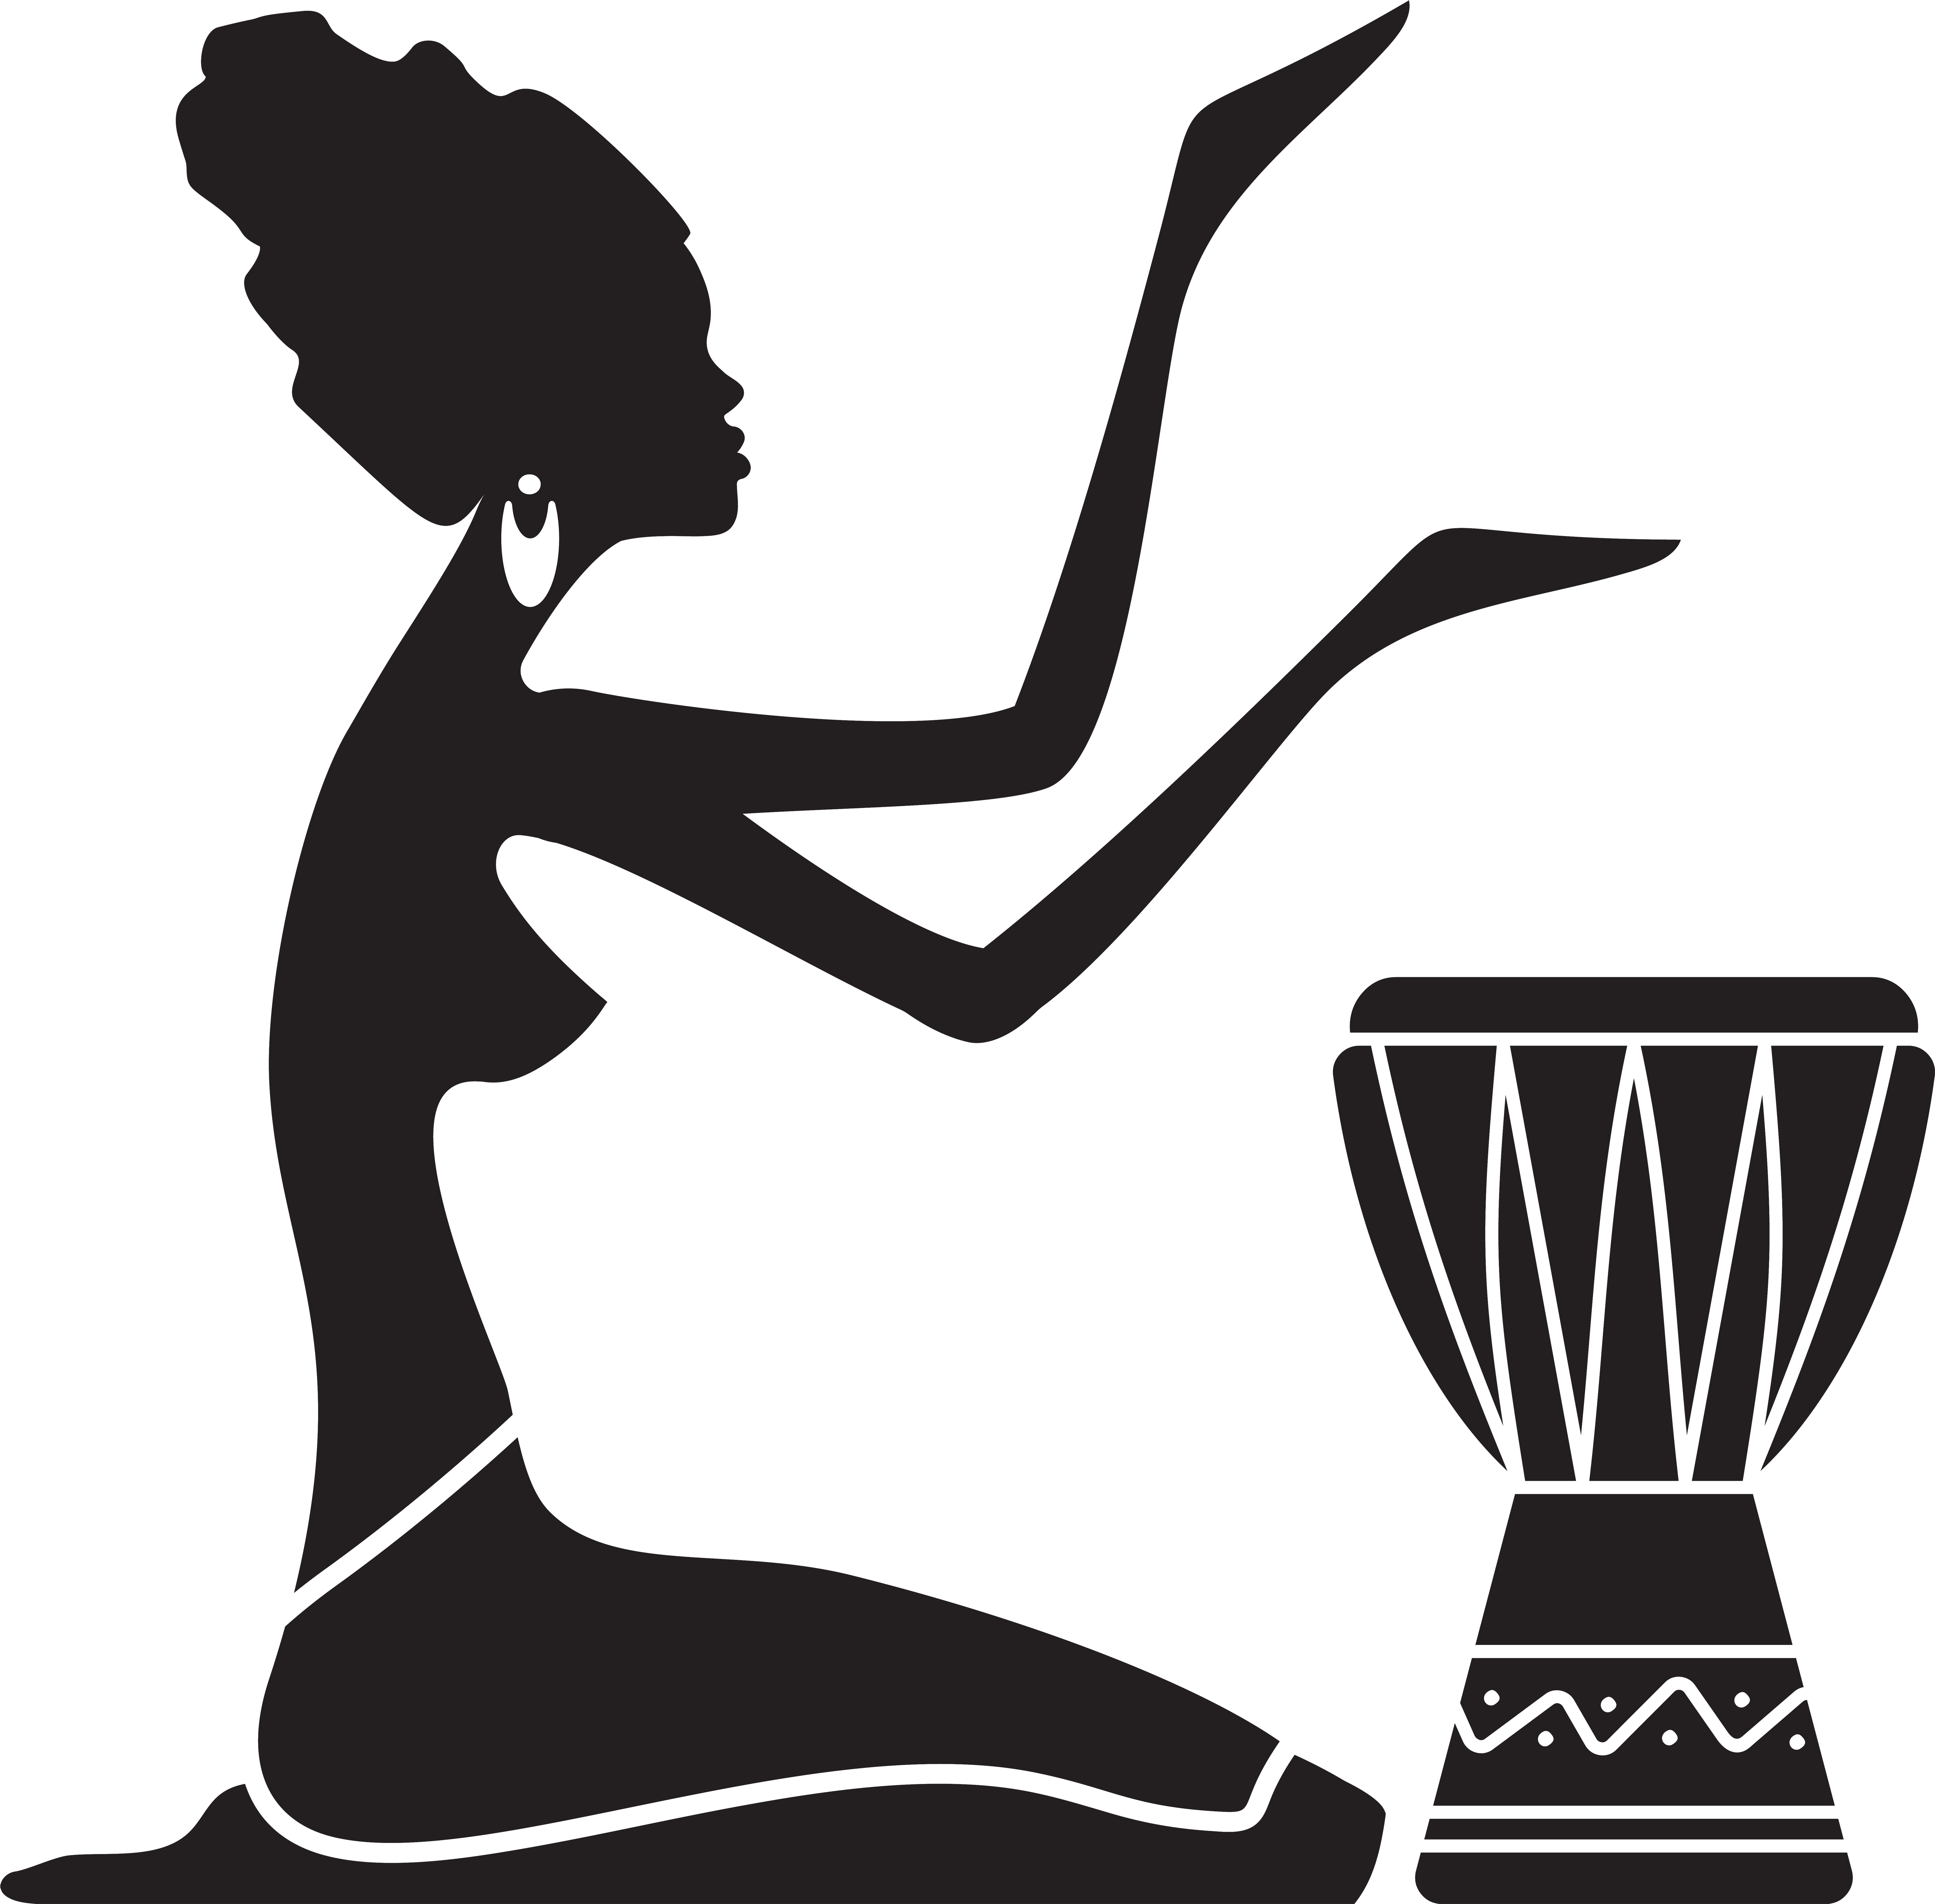 African Drum Silhouette (7000x6827)